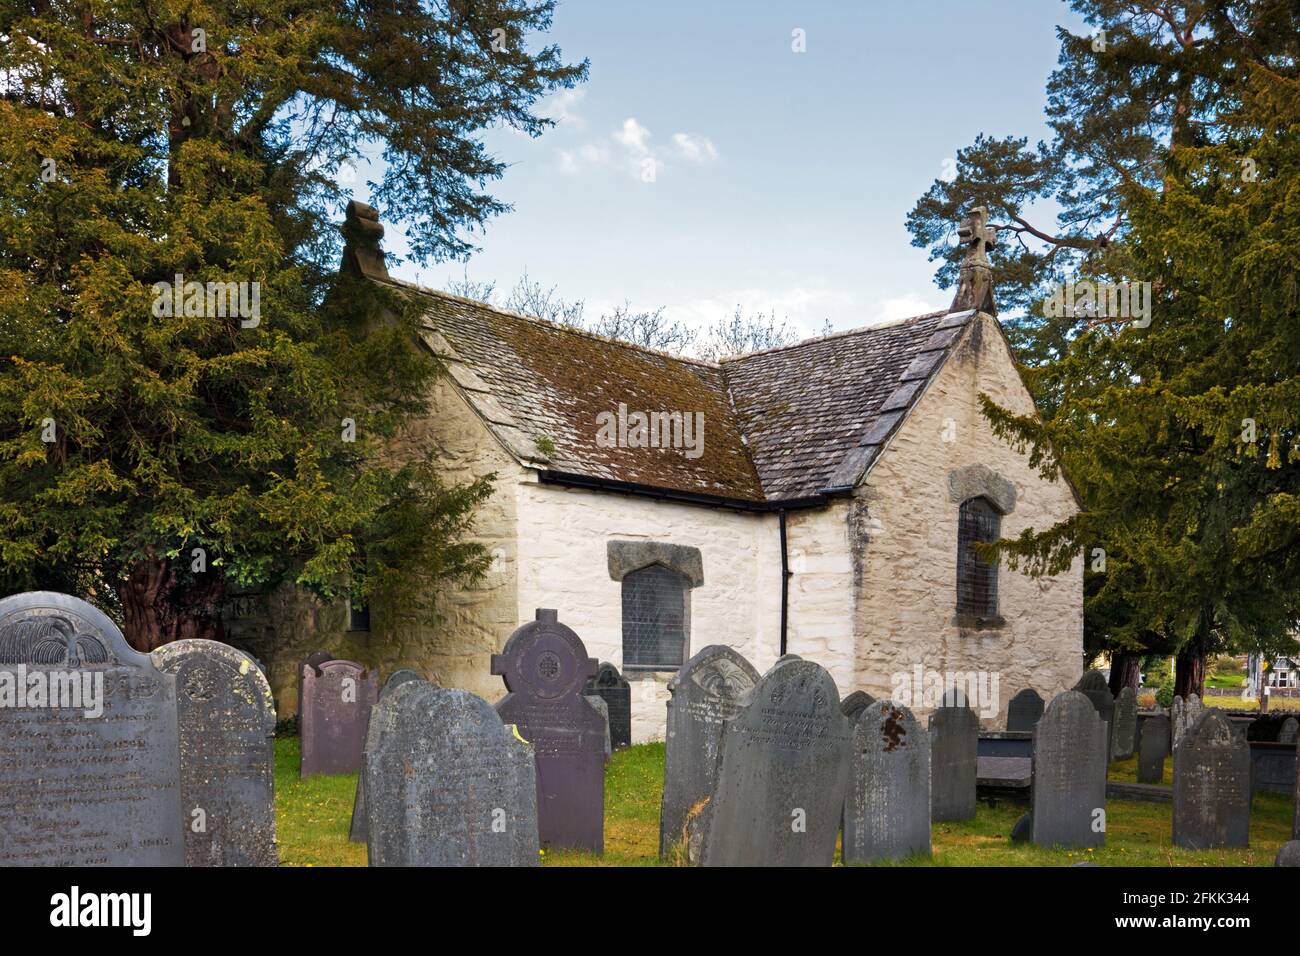 St Gwyddelan's Church in Dolwyddelan, Snowdonia, was built in about 1500 making it around 500 years old. It is now a Grade I listed building. Stock Photo